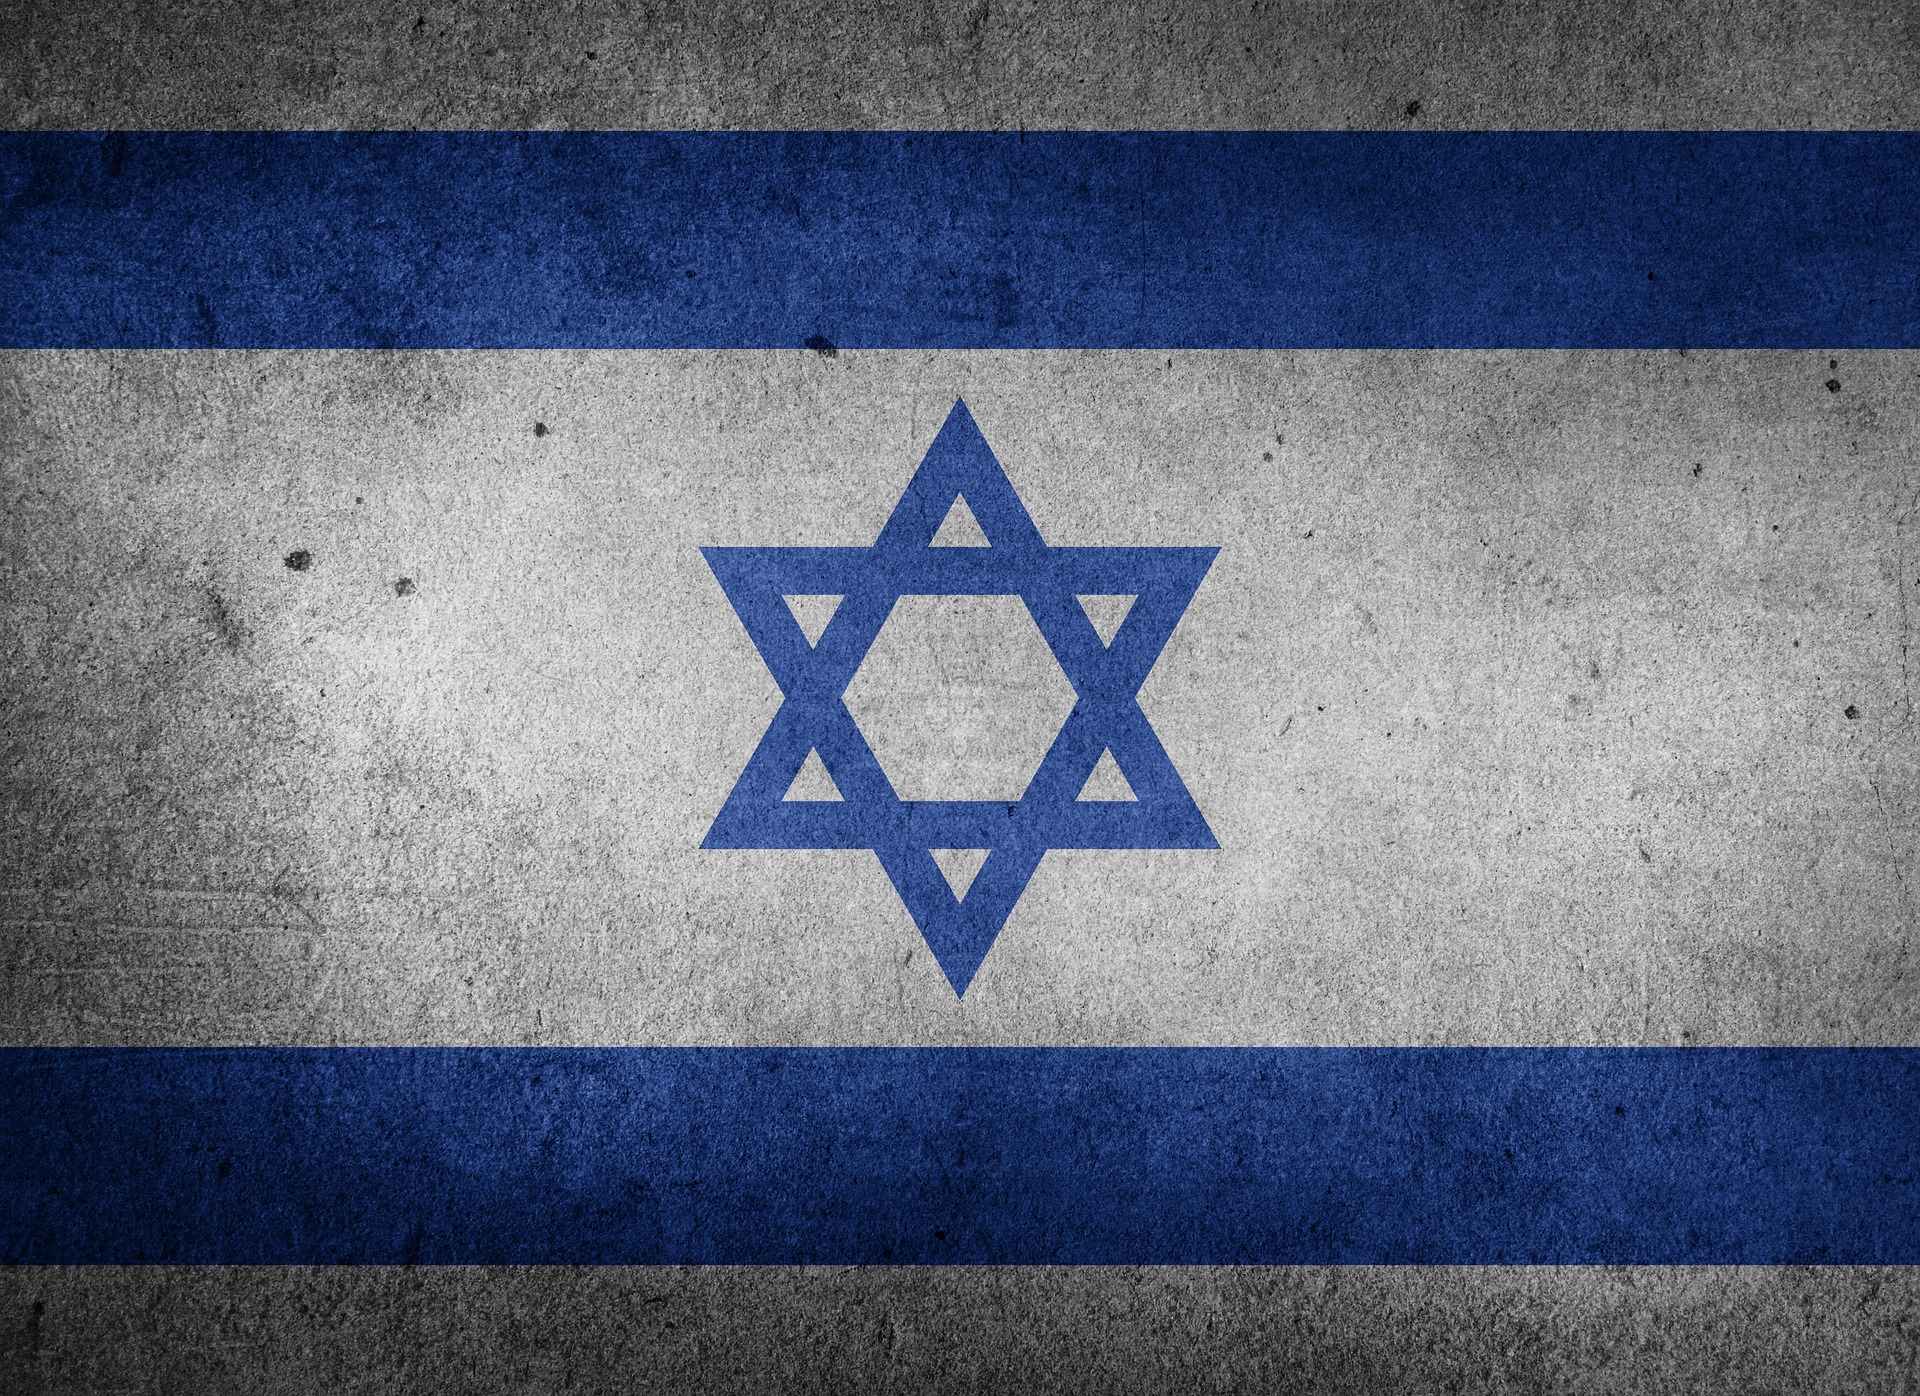 ELCA's Detrimental Obsession with Israel